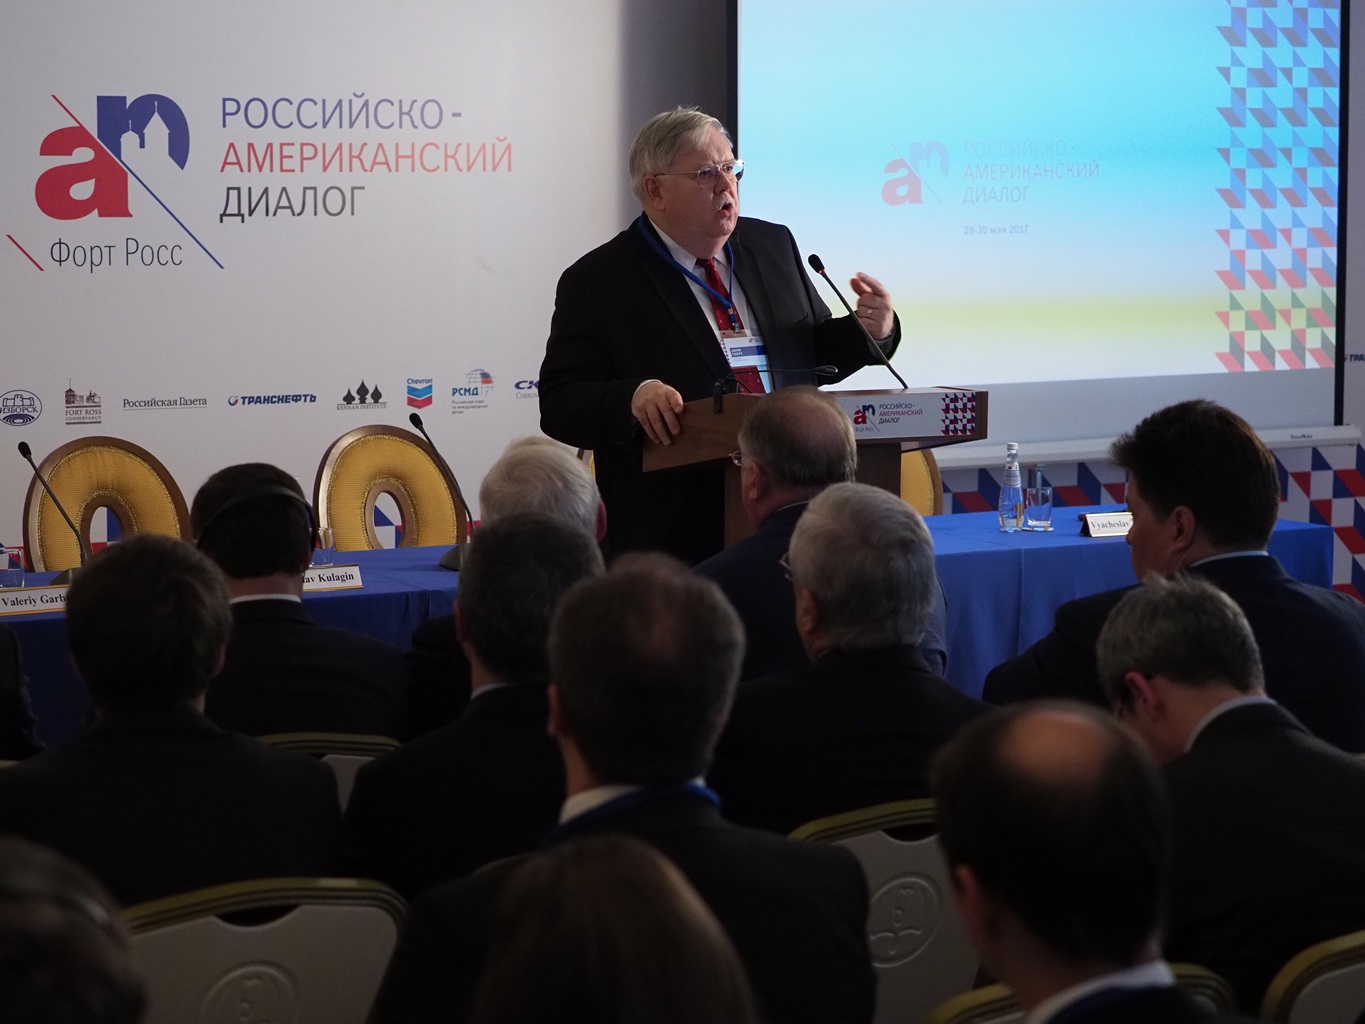 U.S. Ambassador to Russia John Tefft opening the conference.